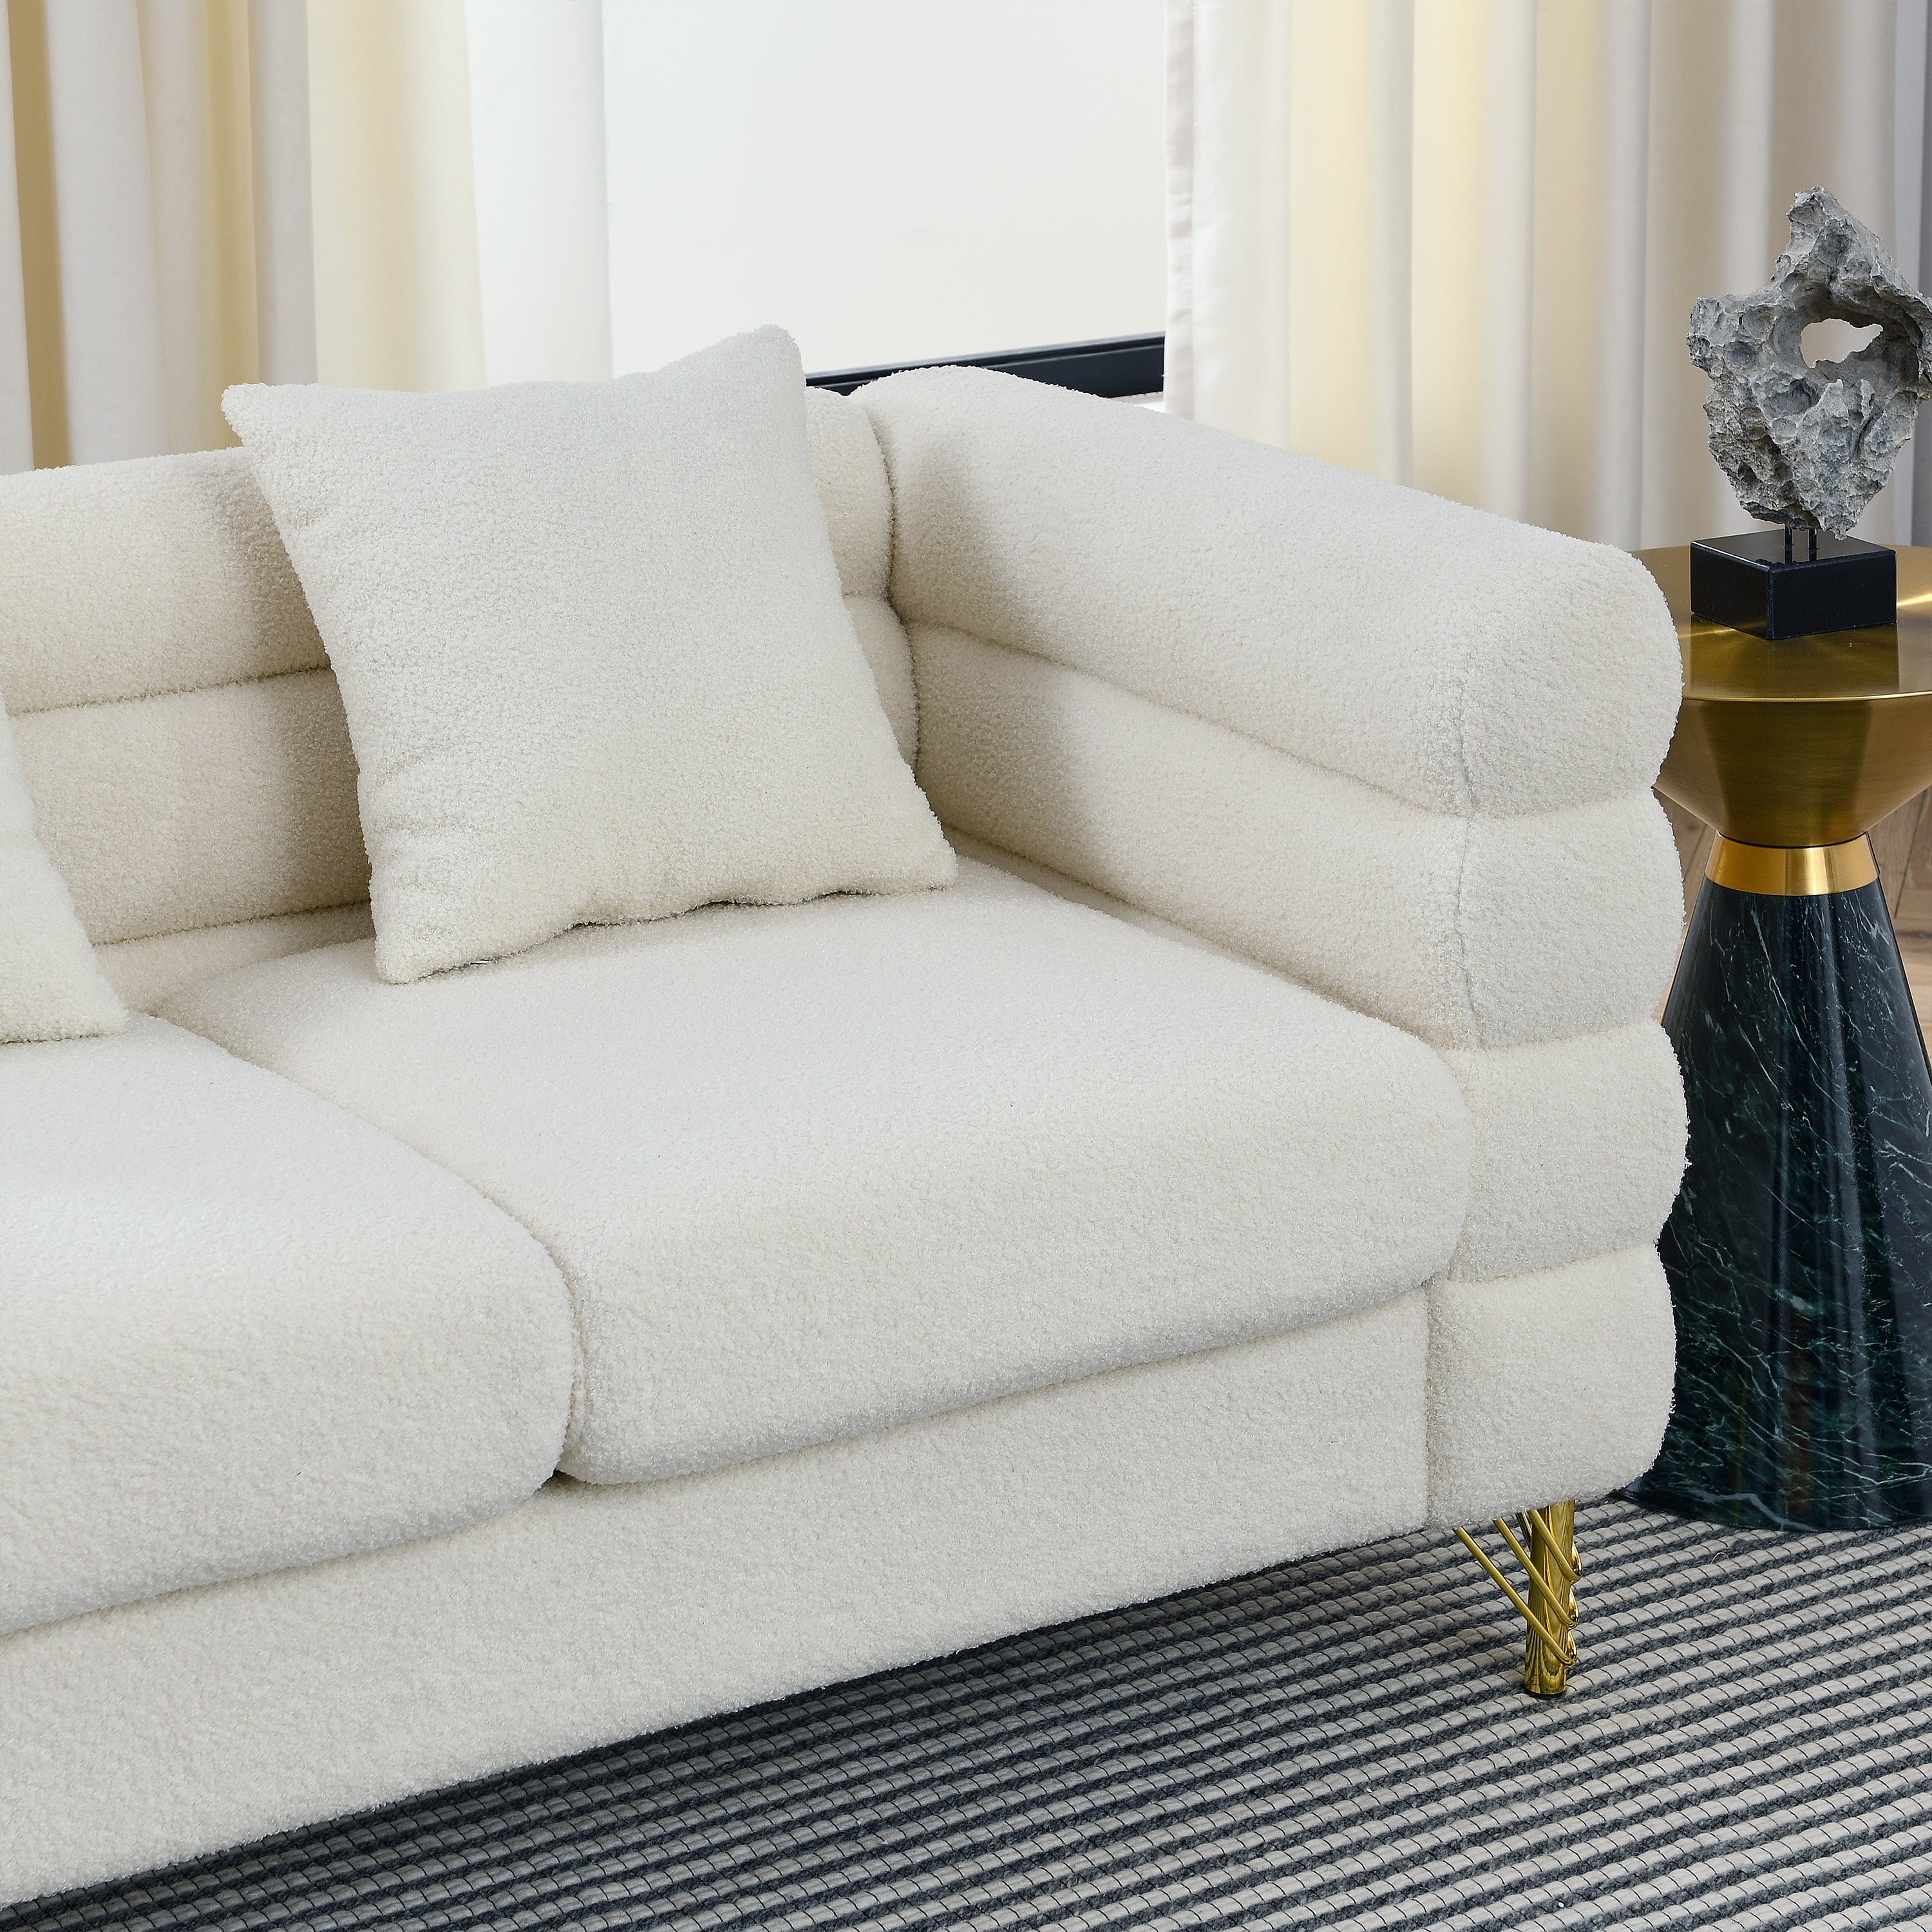 81" Beige Boucle Fabric Sofa With Gold Metal Legs